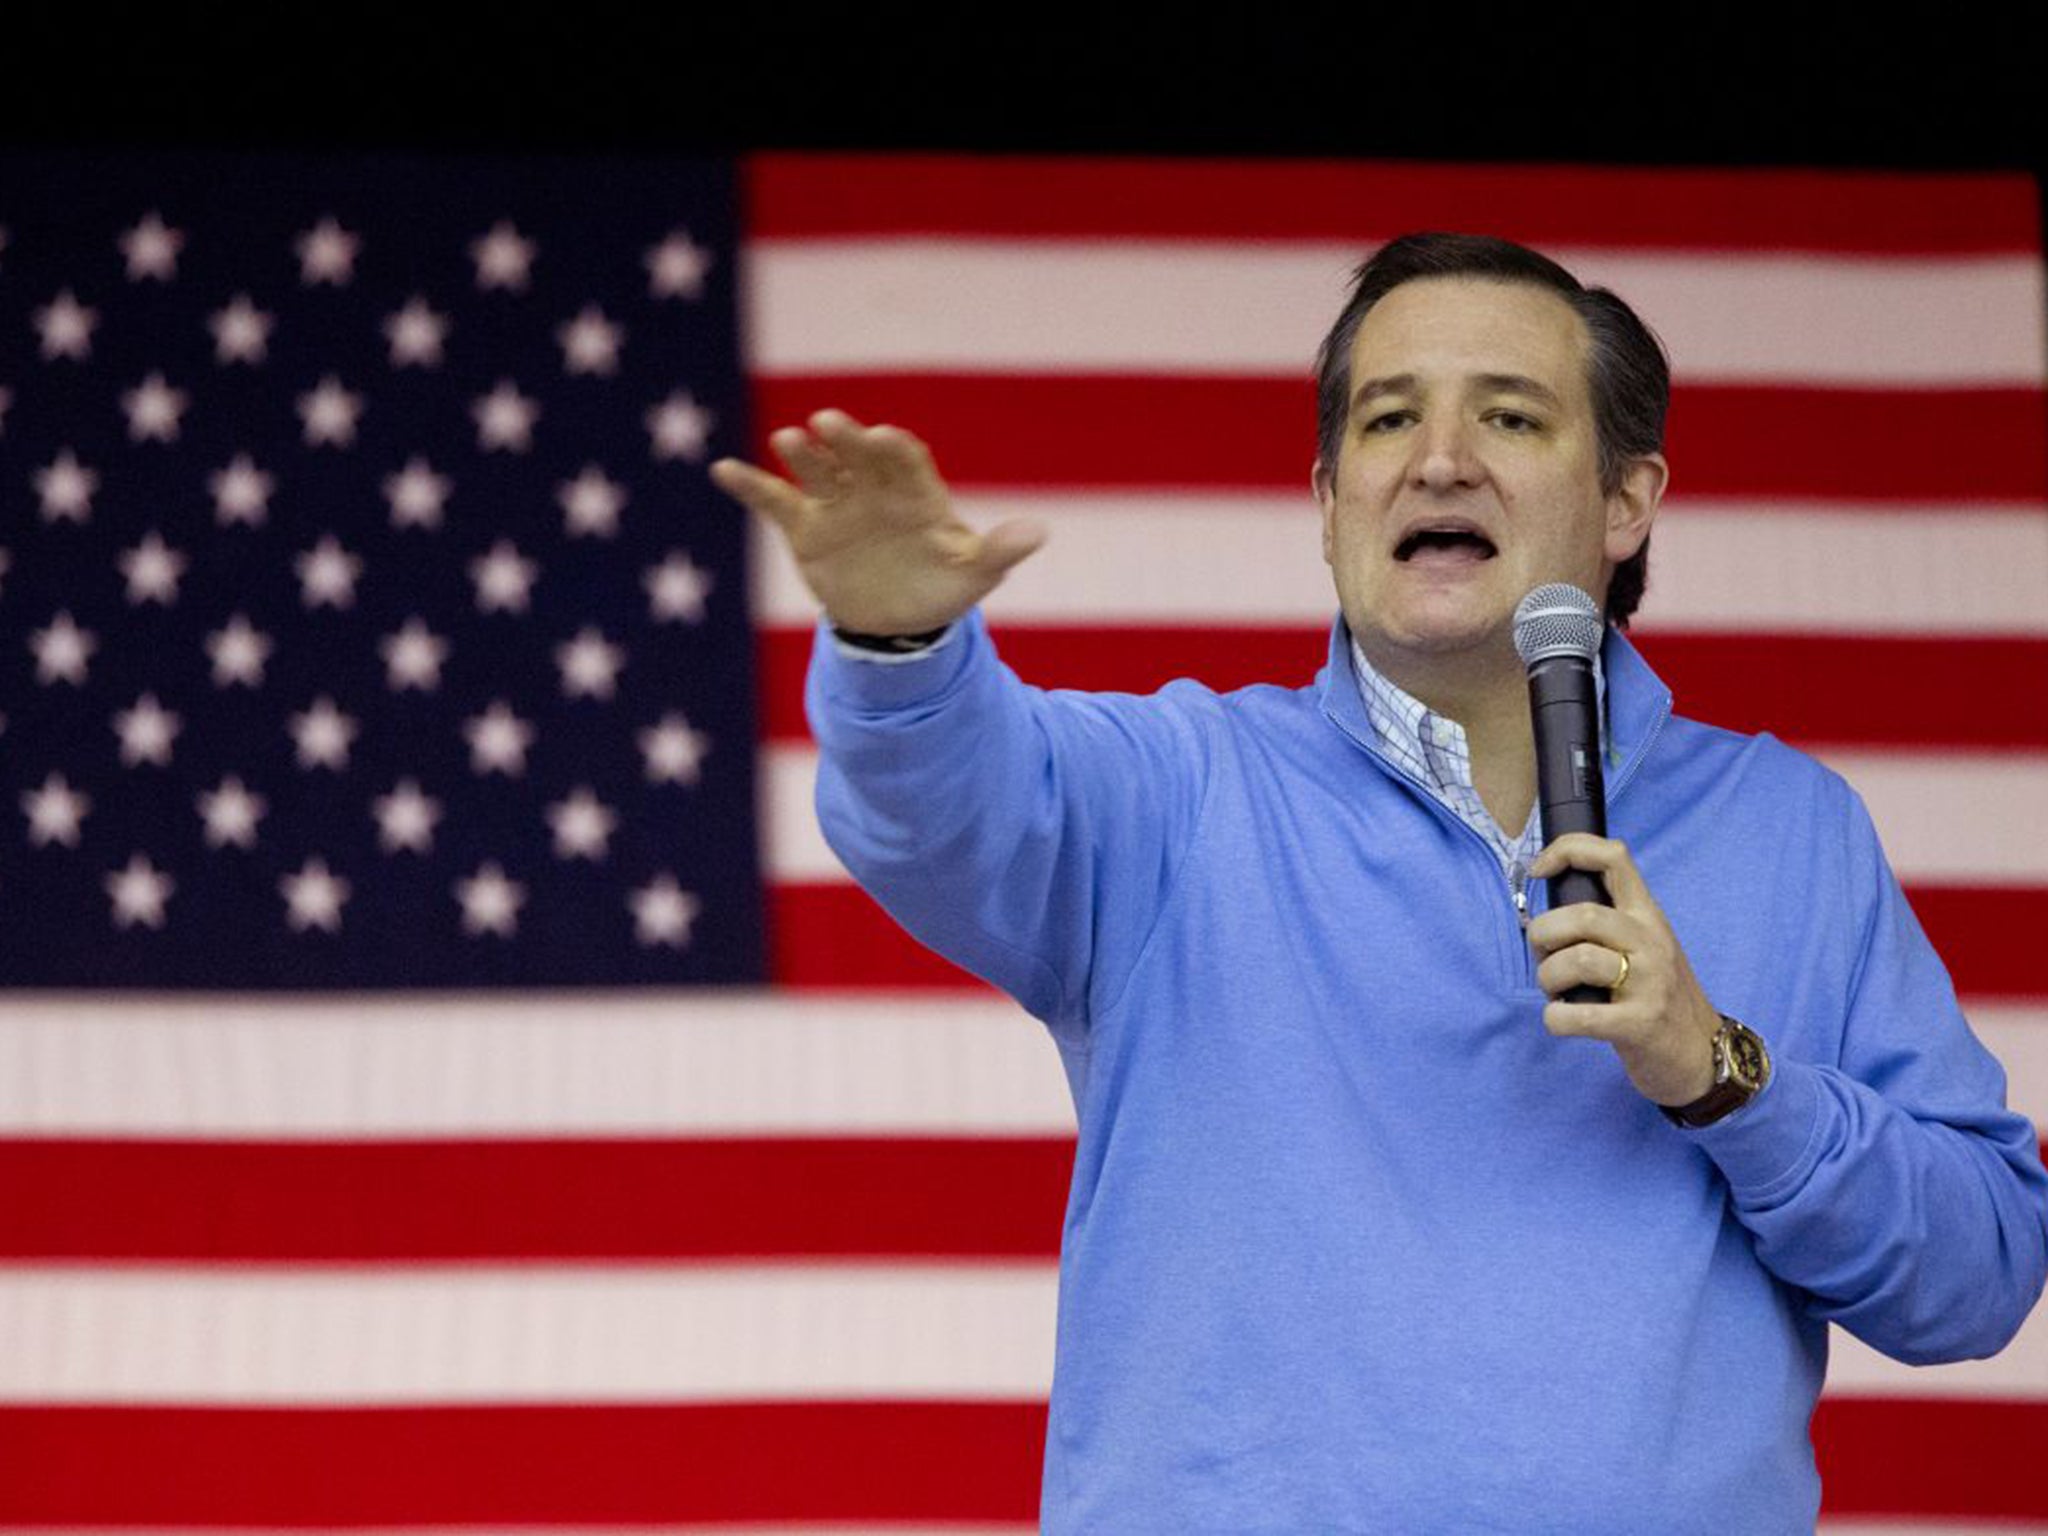 Republican presidential candidate Ted Cruz speaks during a town hall meeting in Wilton, Iowa